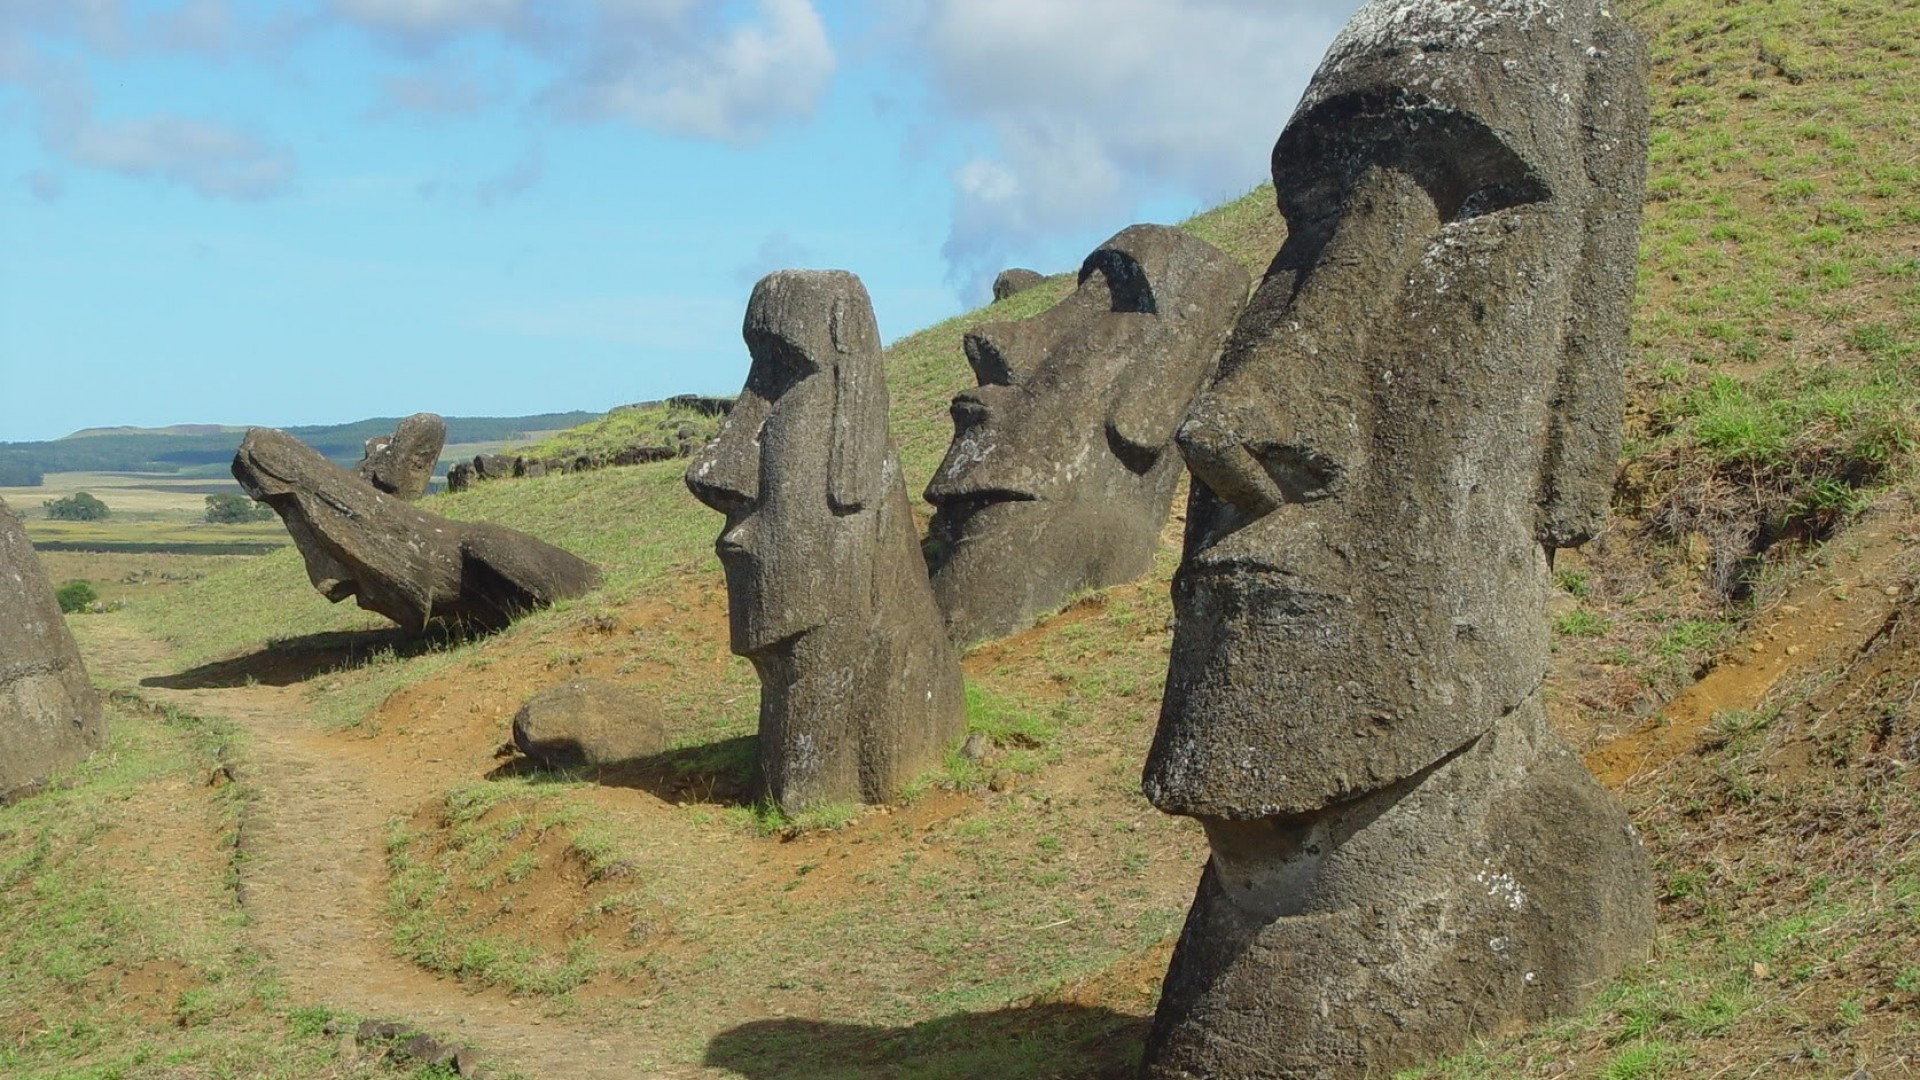 Wallpaper Wiki Easter Island Image Pic Wpd008116